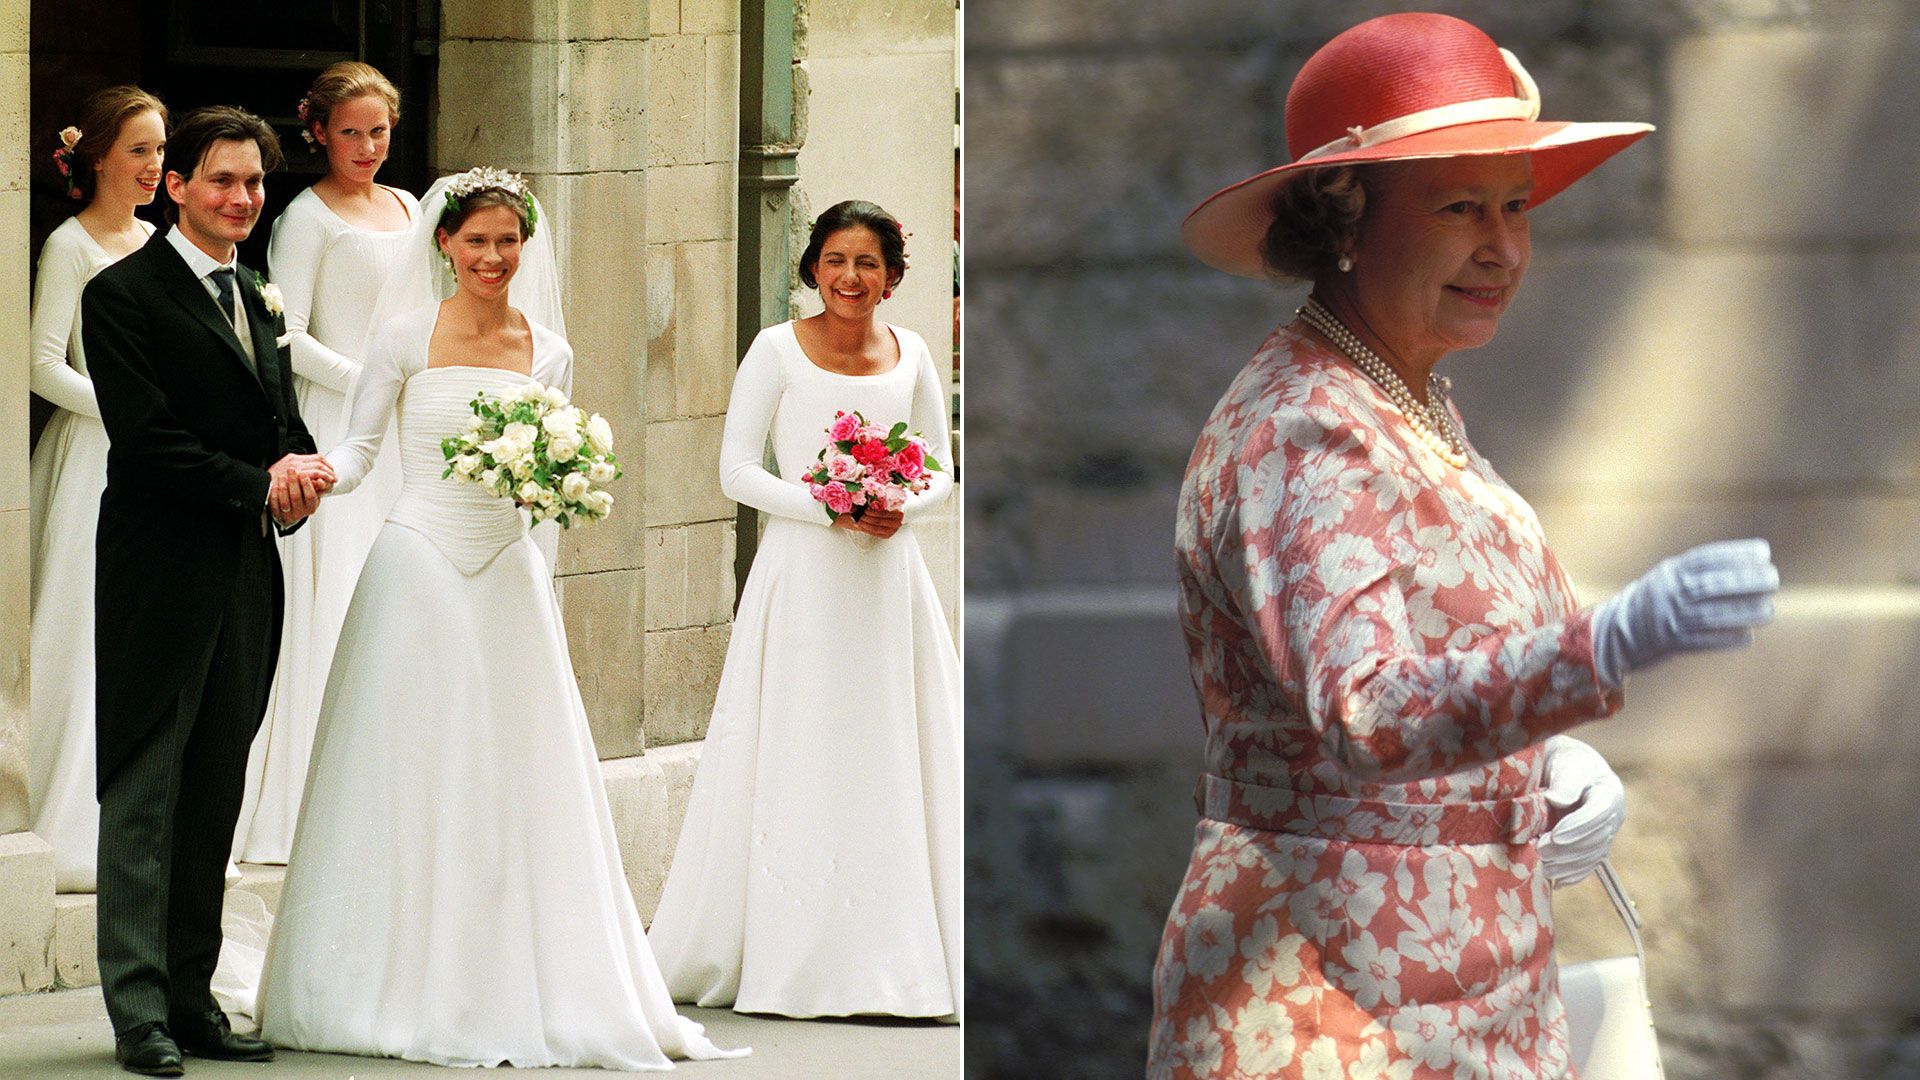 The most breathtaking photos from Lady Sarah Chatto's fairytale wedding